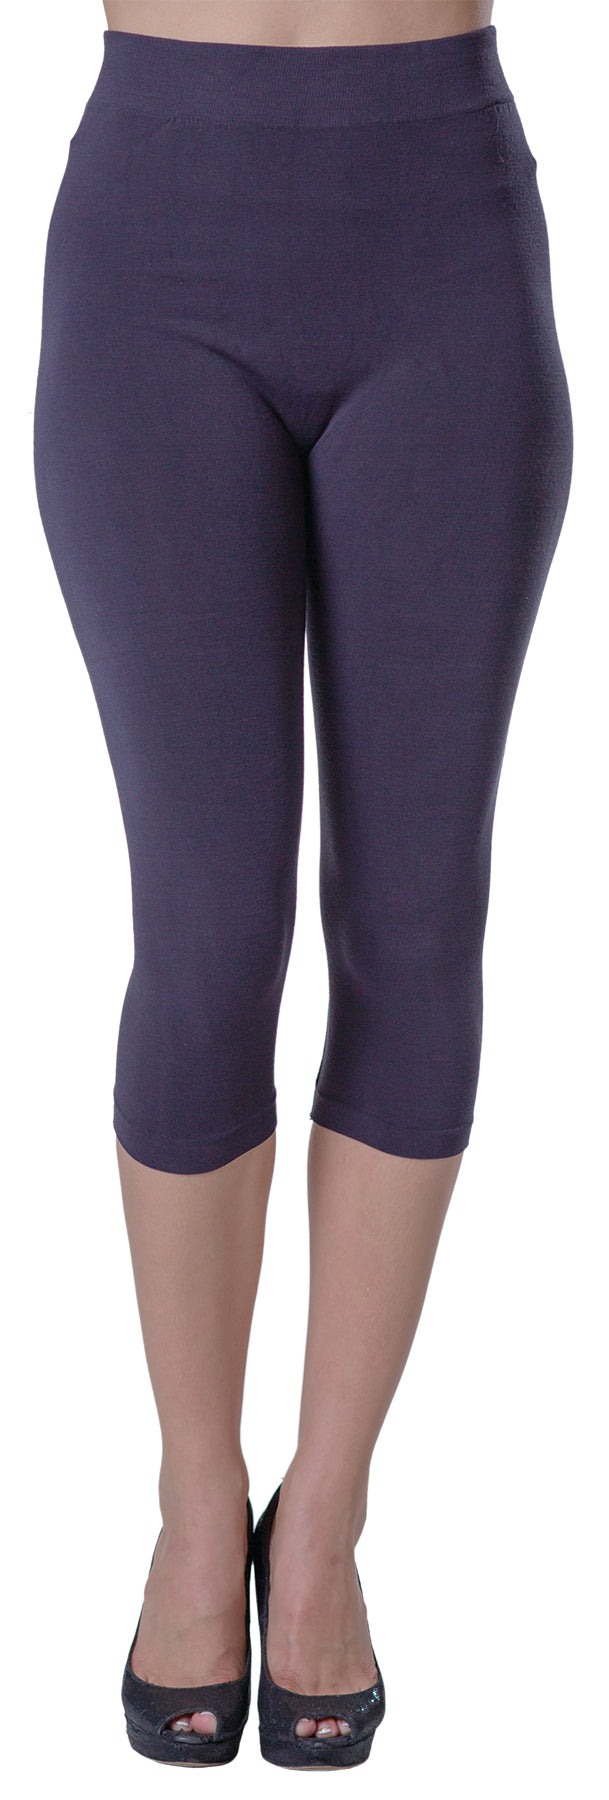 One-Size Bamboo Capris